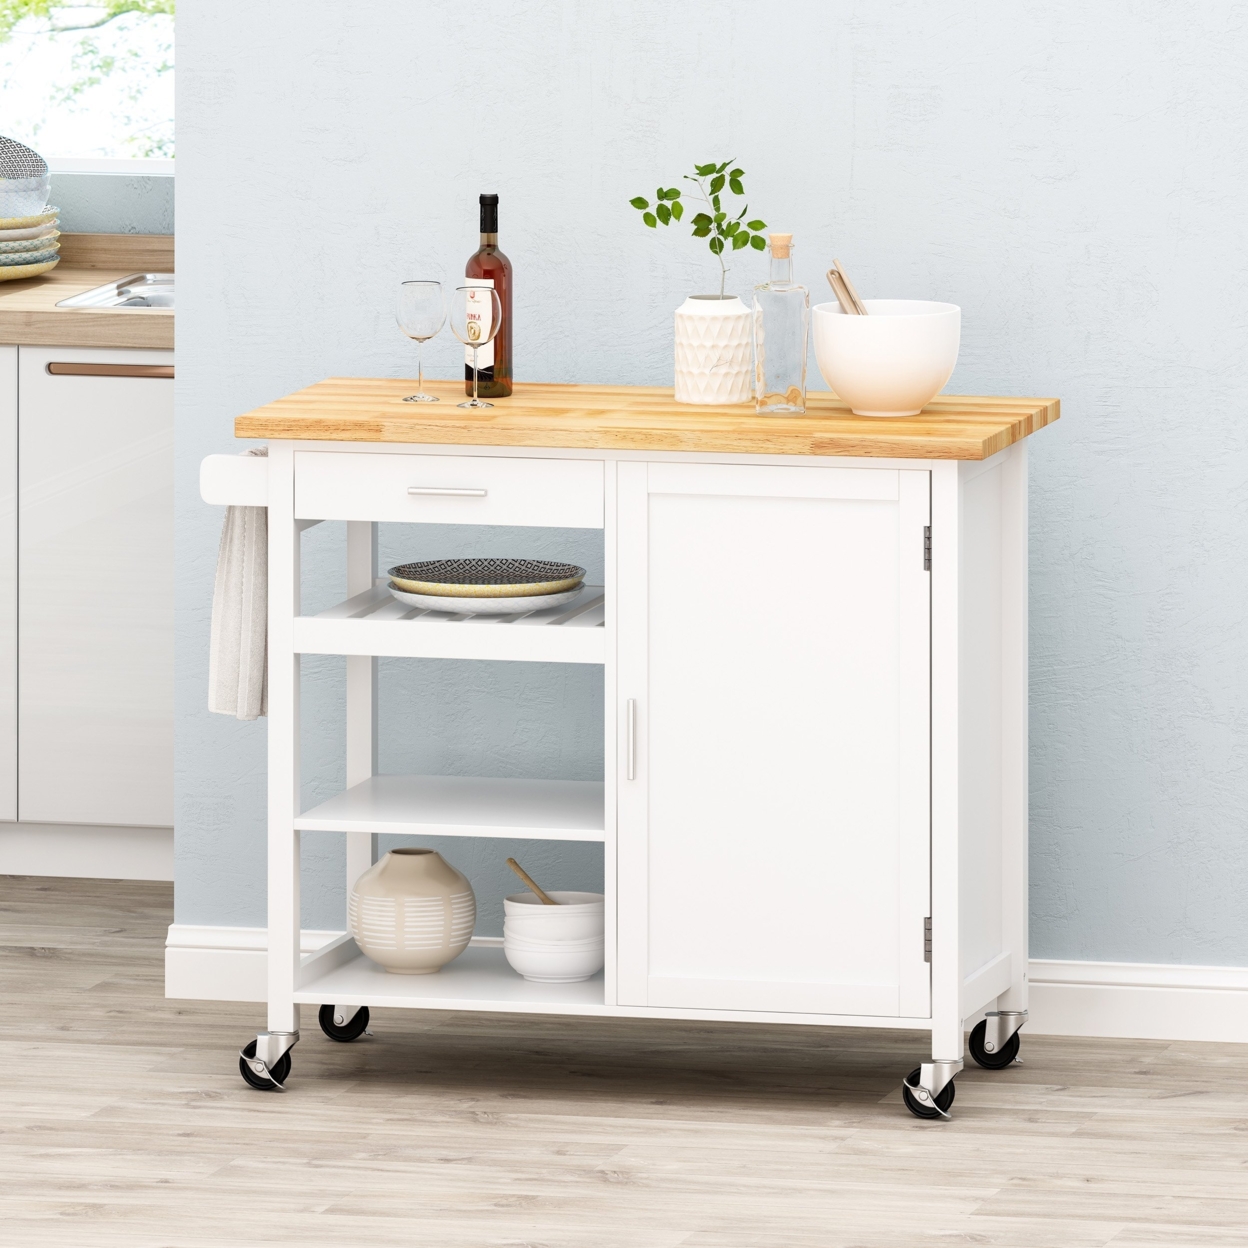 Carmelina Contemporary Kitchen Cart With Wheels - White/natural